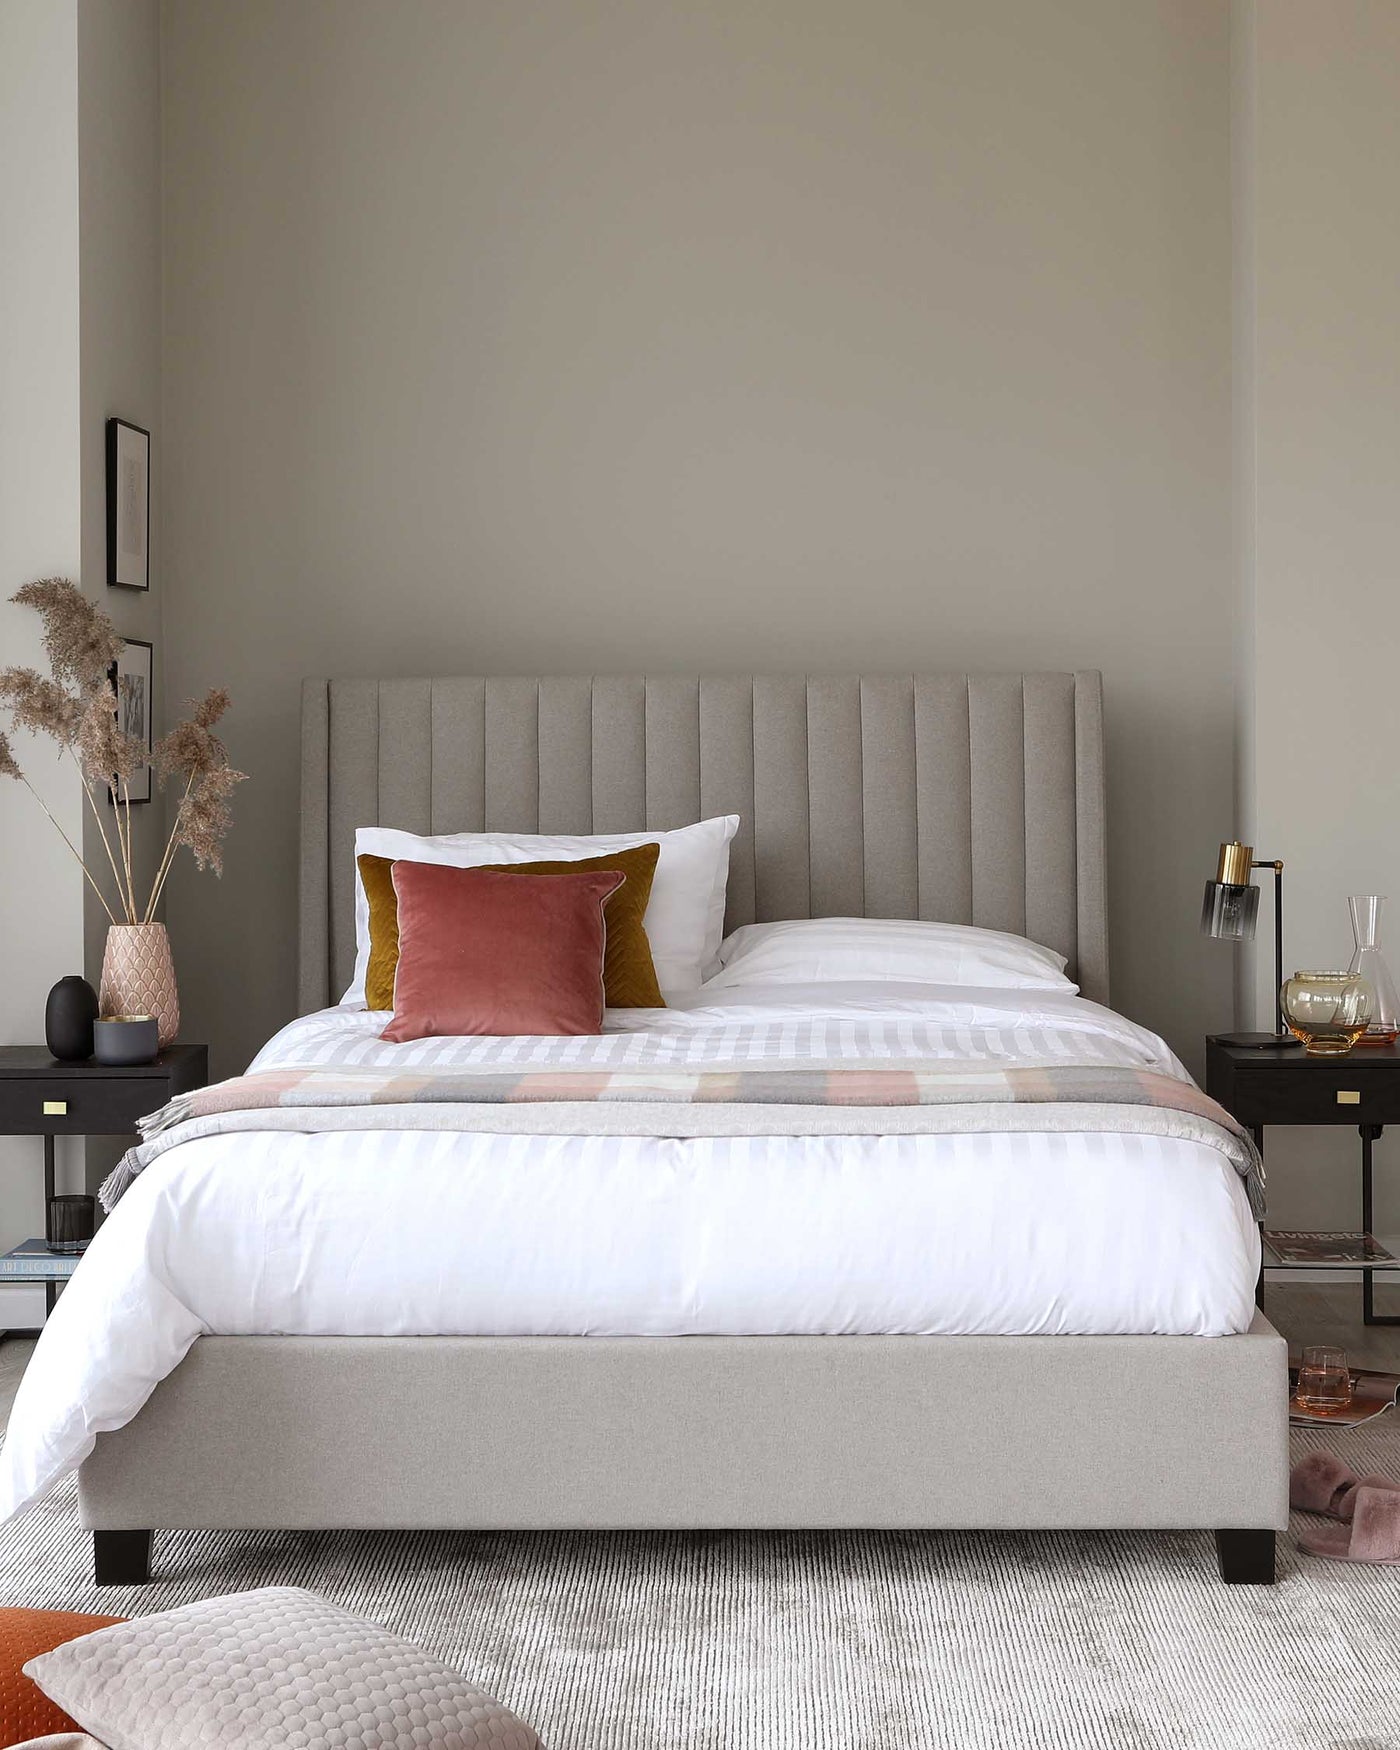 Contemporary bedroom showcasing a sleek upholstered platform bed with a tall, channel-tufted headboard in a neutral grey fabric. The bed is dressed in white bedding with a checkered pattern and accented with a mustard and a rust-coloured pillow. A simple black nightstand with an open shelf is placed beside the bed, holding a small table lamp, books, and decorative items.